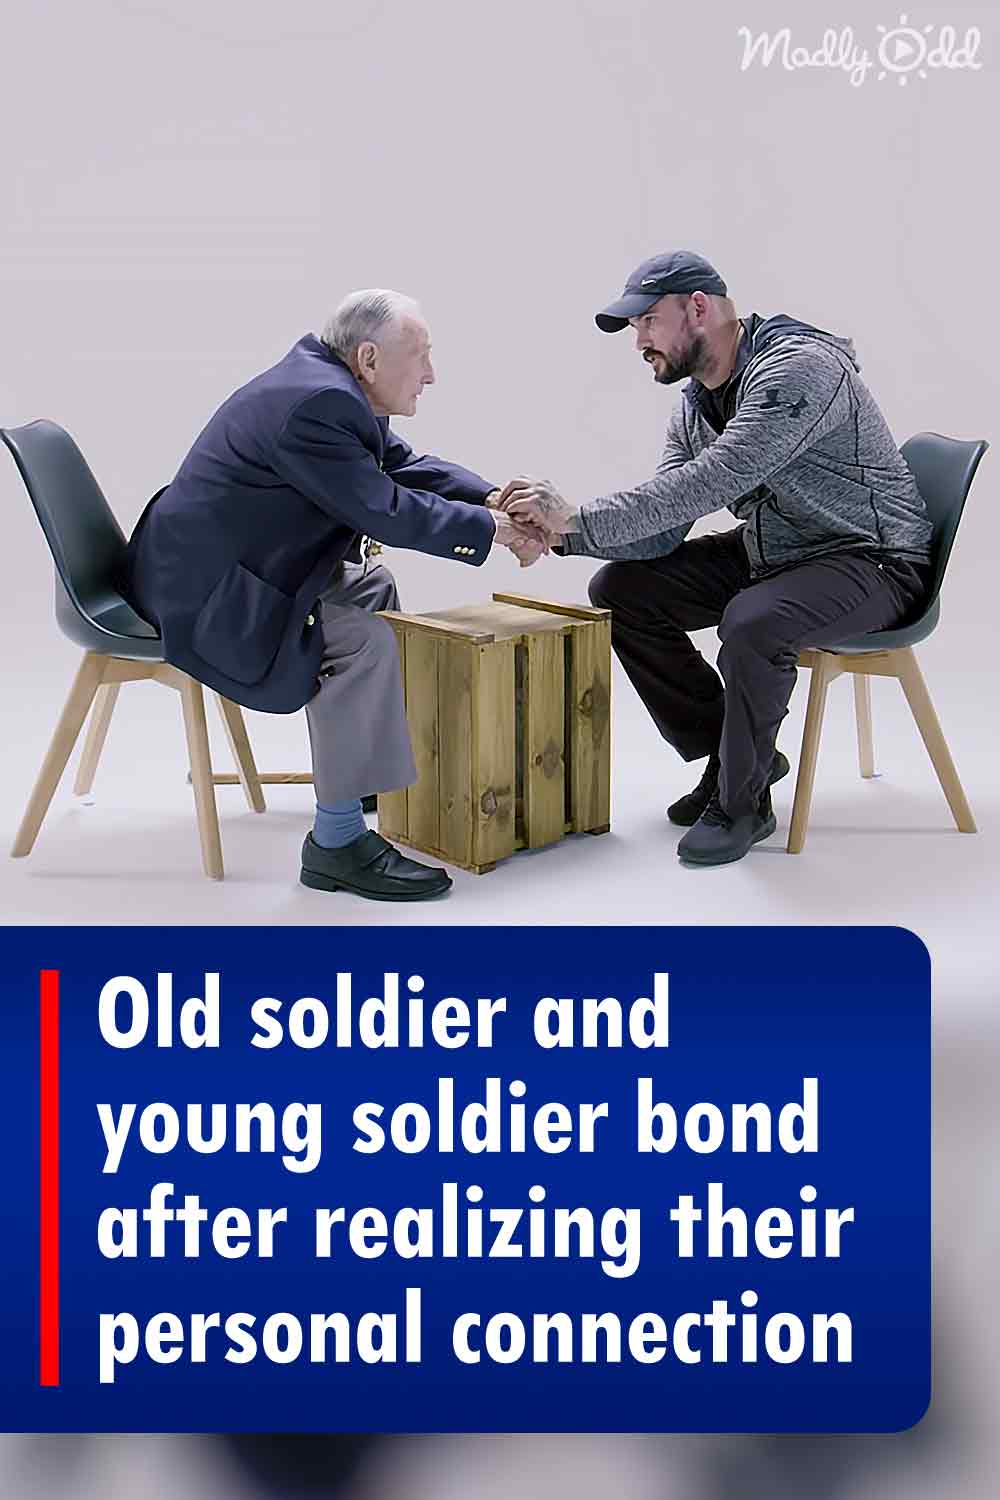 Old soldier and young soldier bond after realizing their personal connection